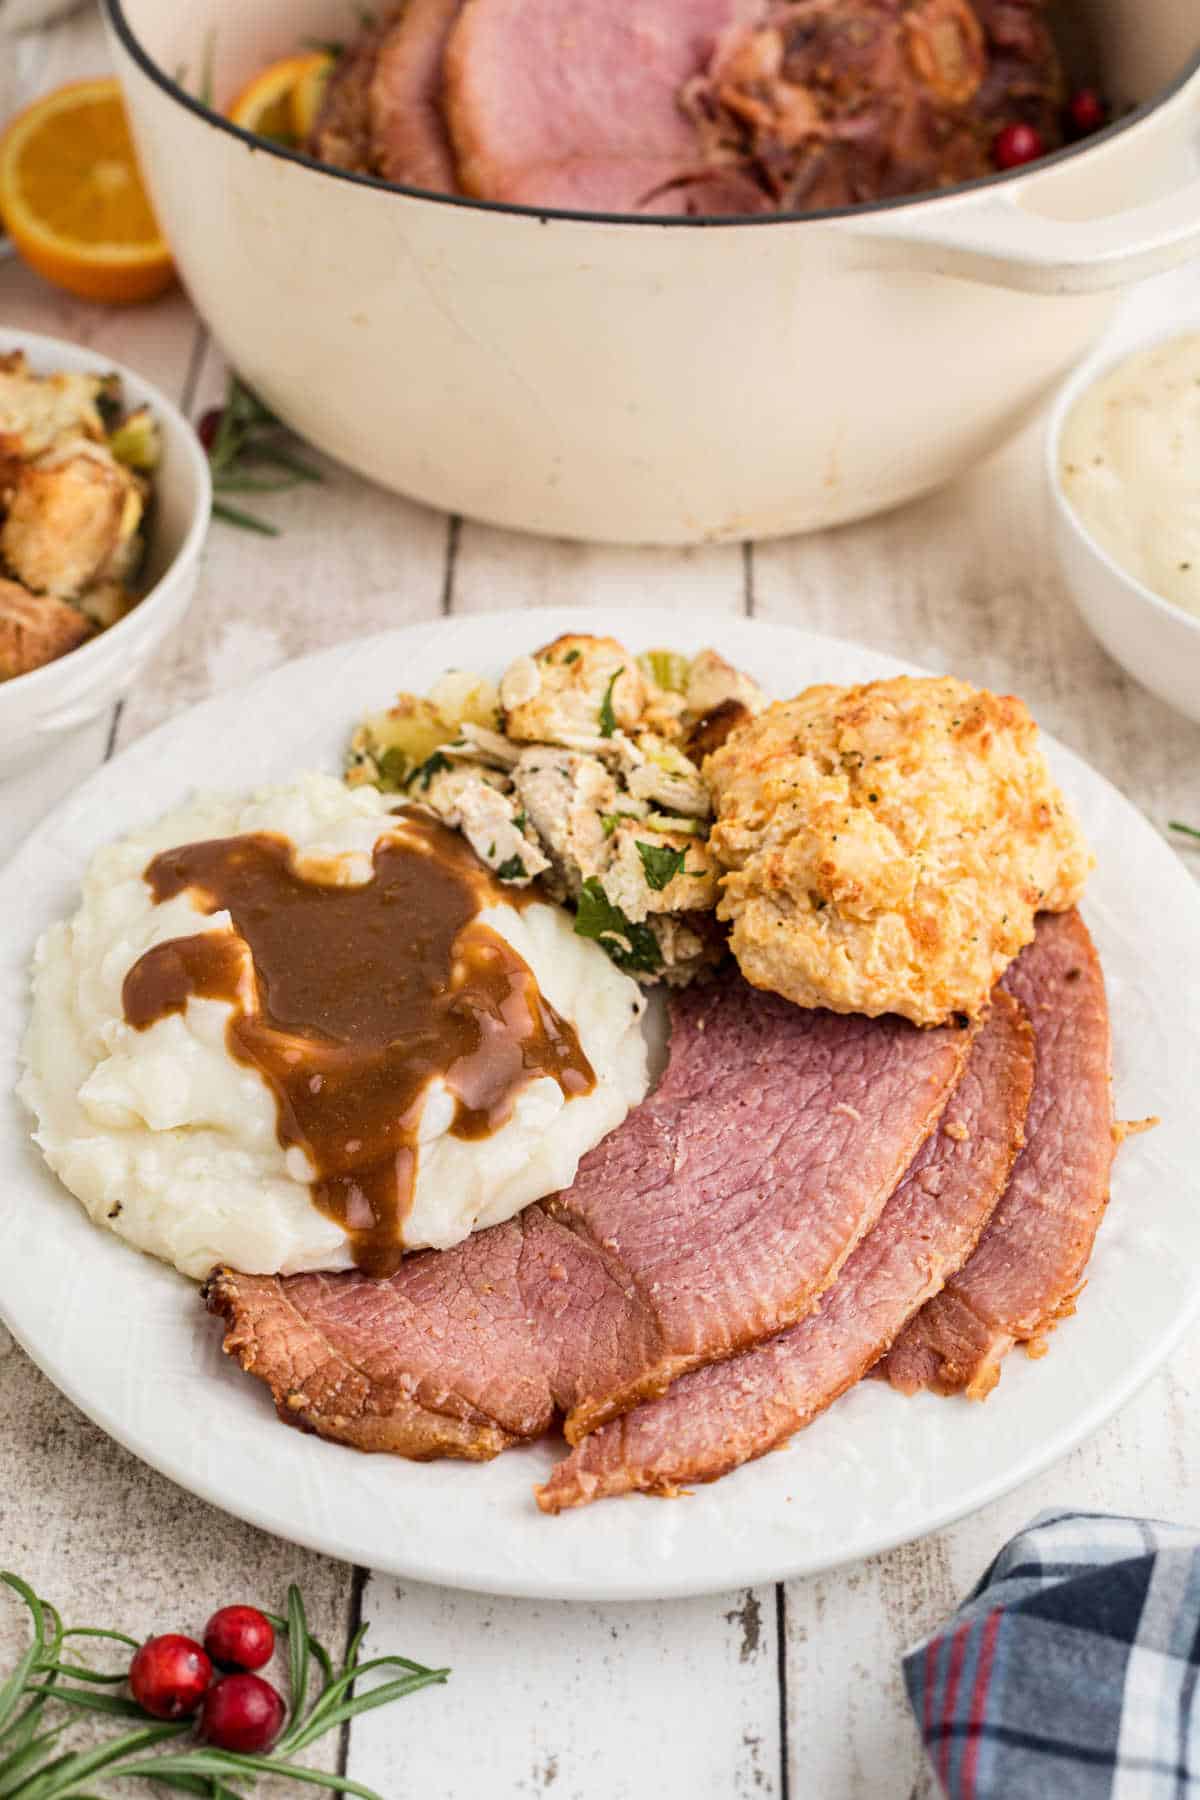 A dished up plate of Dutch Oven Ham with mashed potatoes, stuffing and bread.